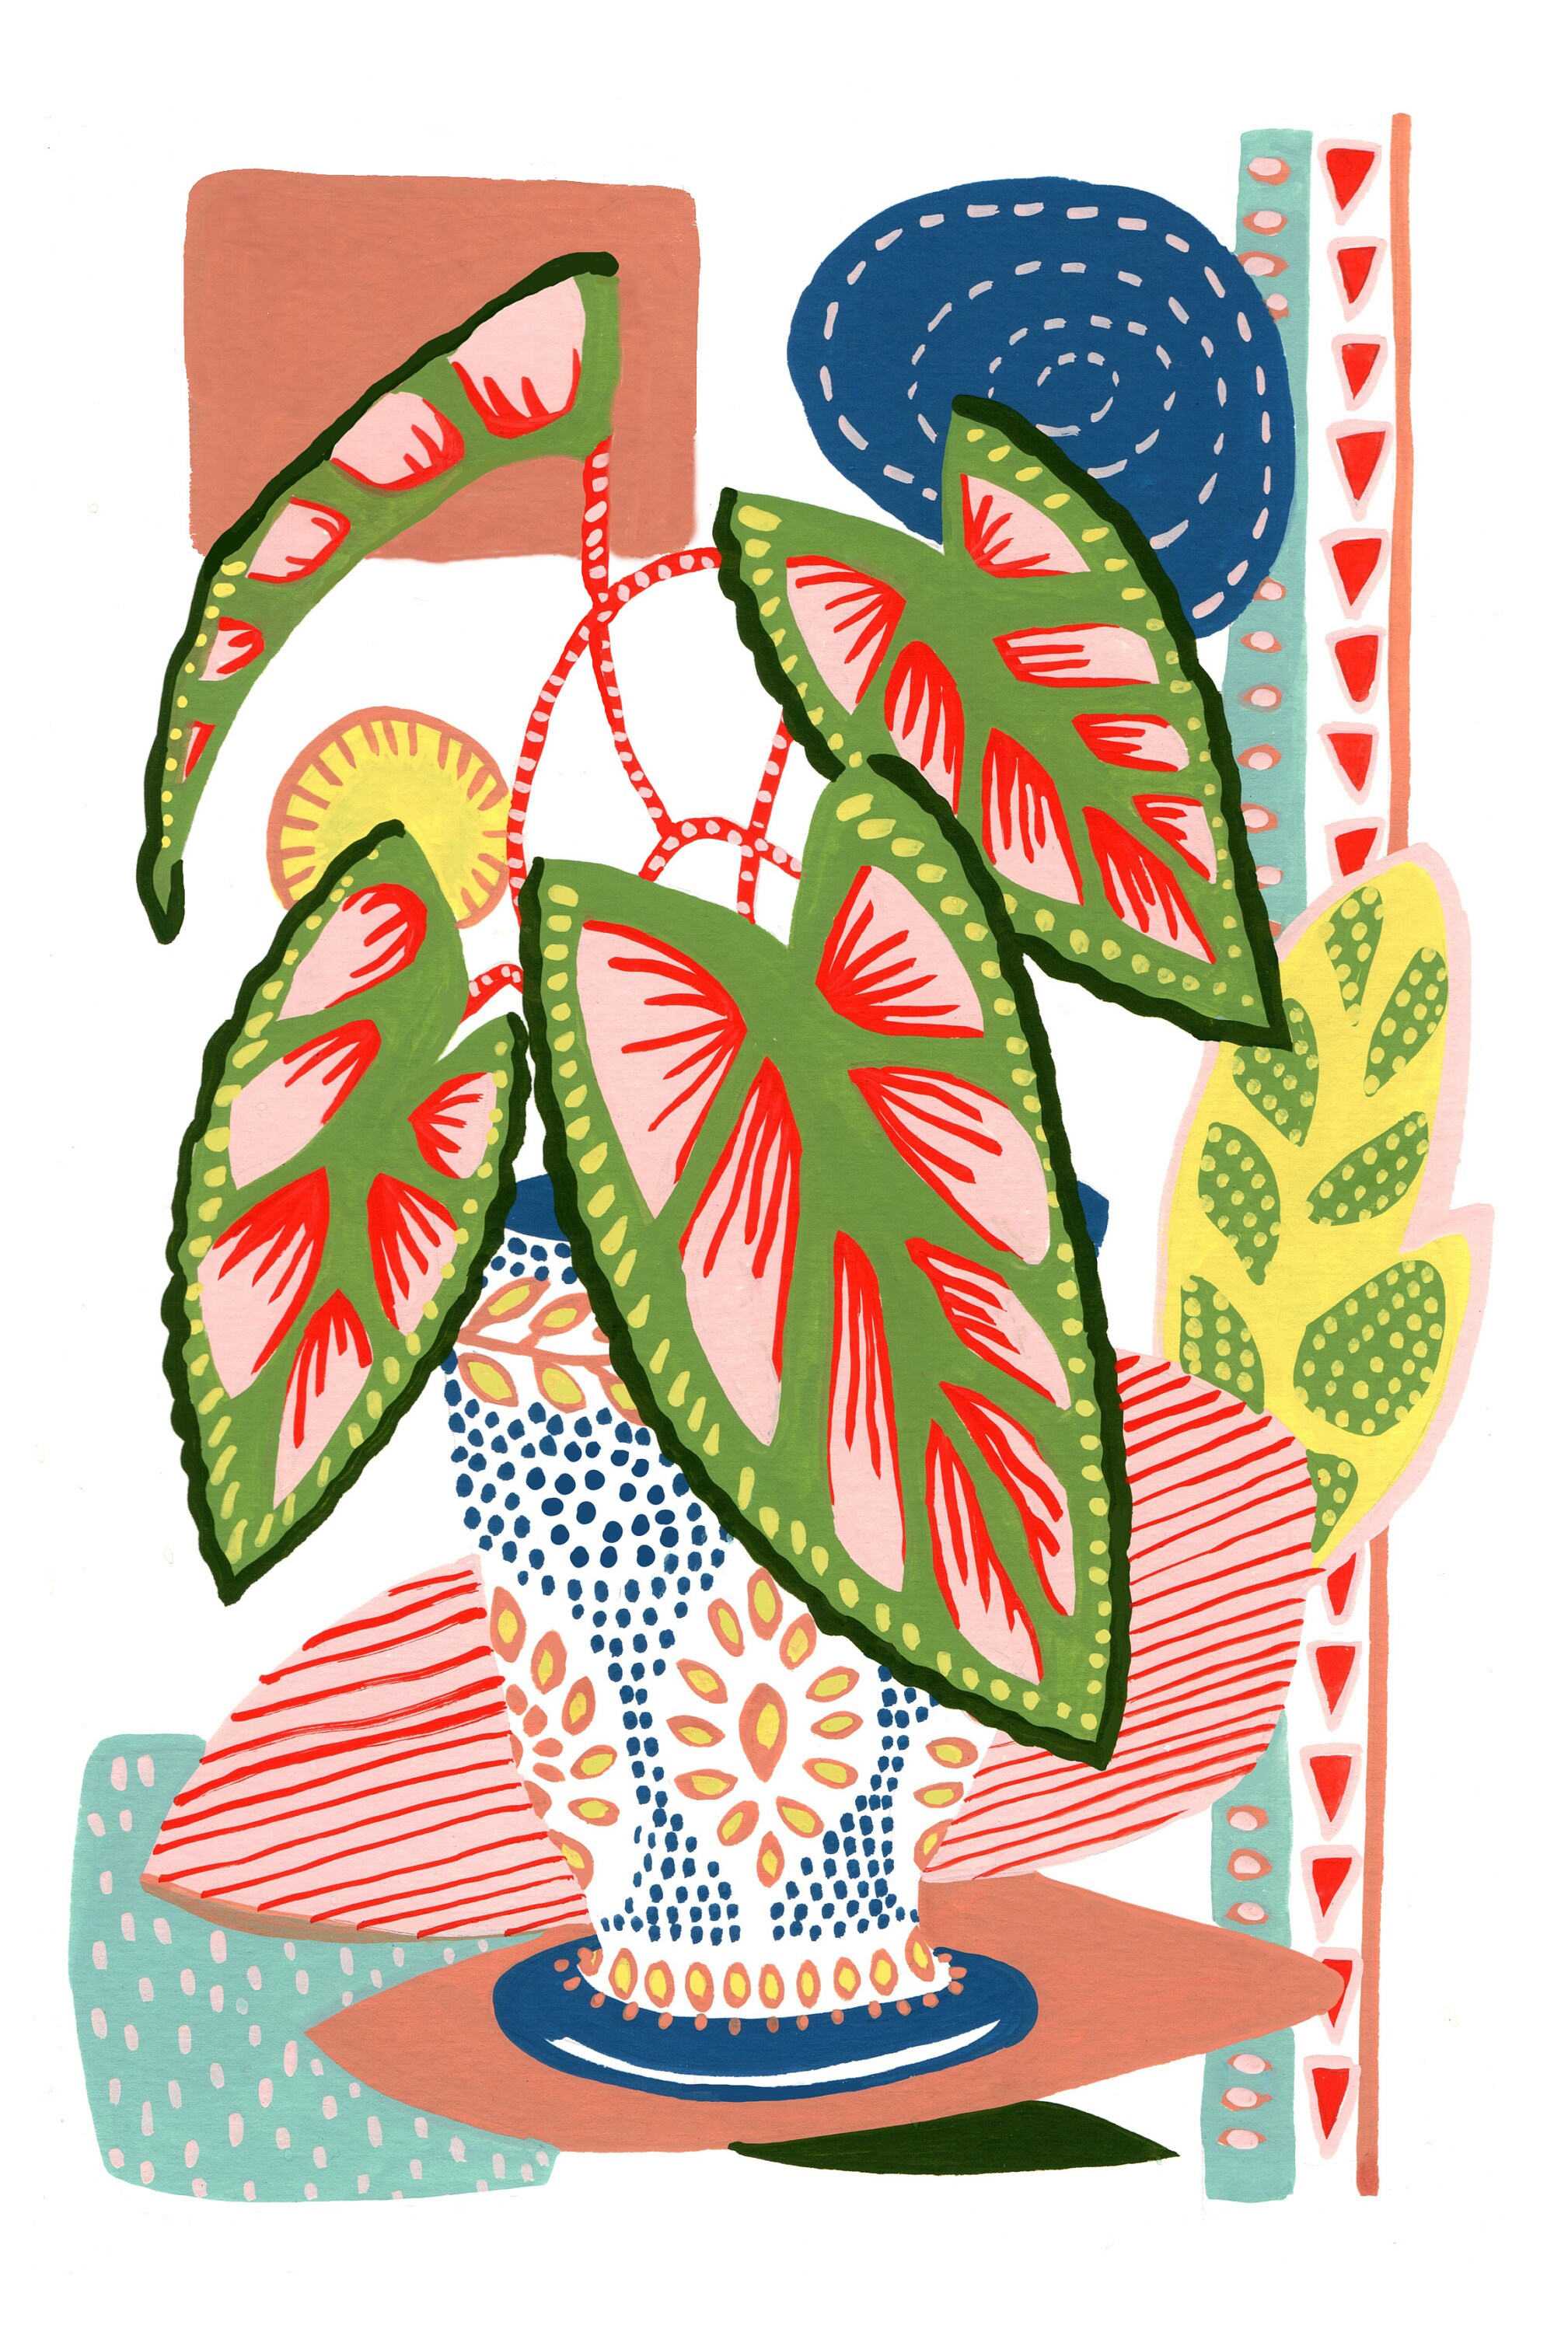 Paint to Print: Digitize a Gouache Floral Design for a Greeting Card, Kate  Cooke